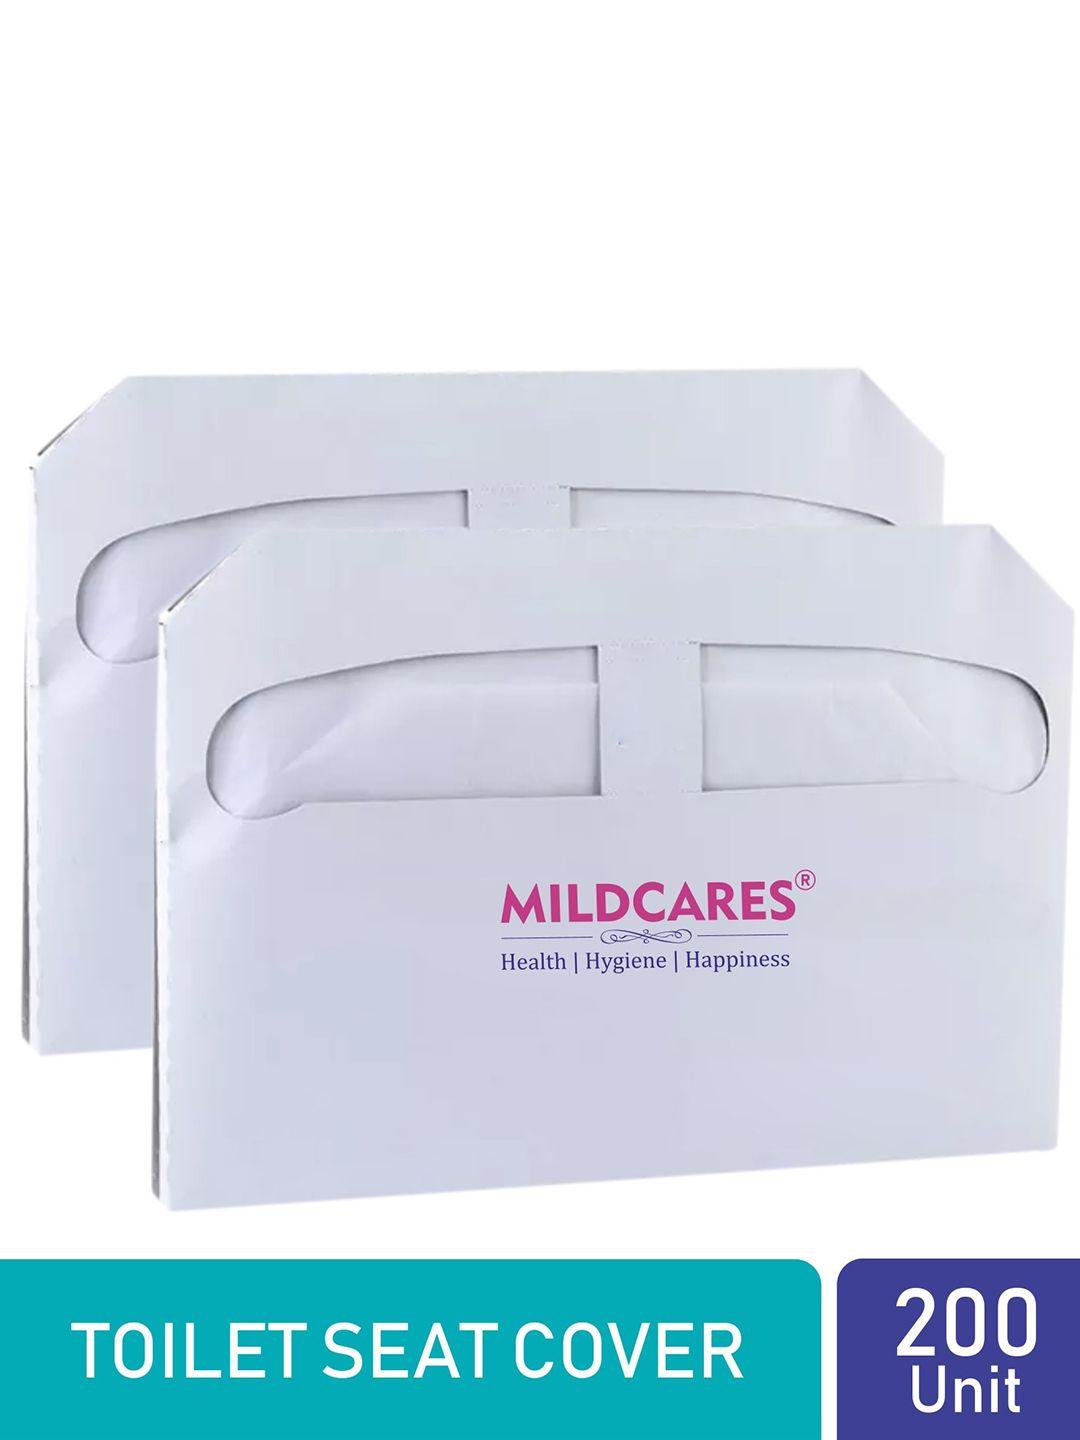 mildcares set of 2 disposable toilet seat covers - 100 sheets each